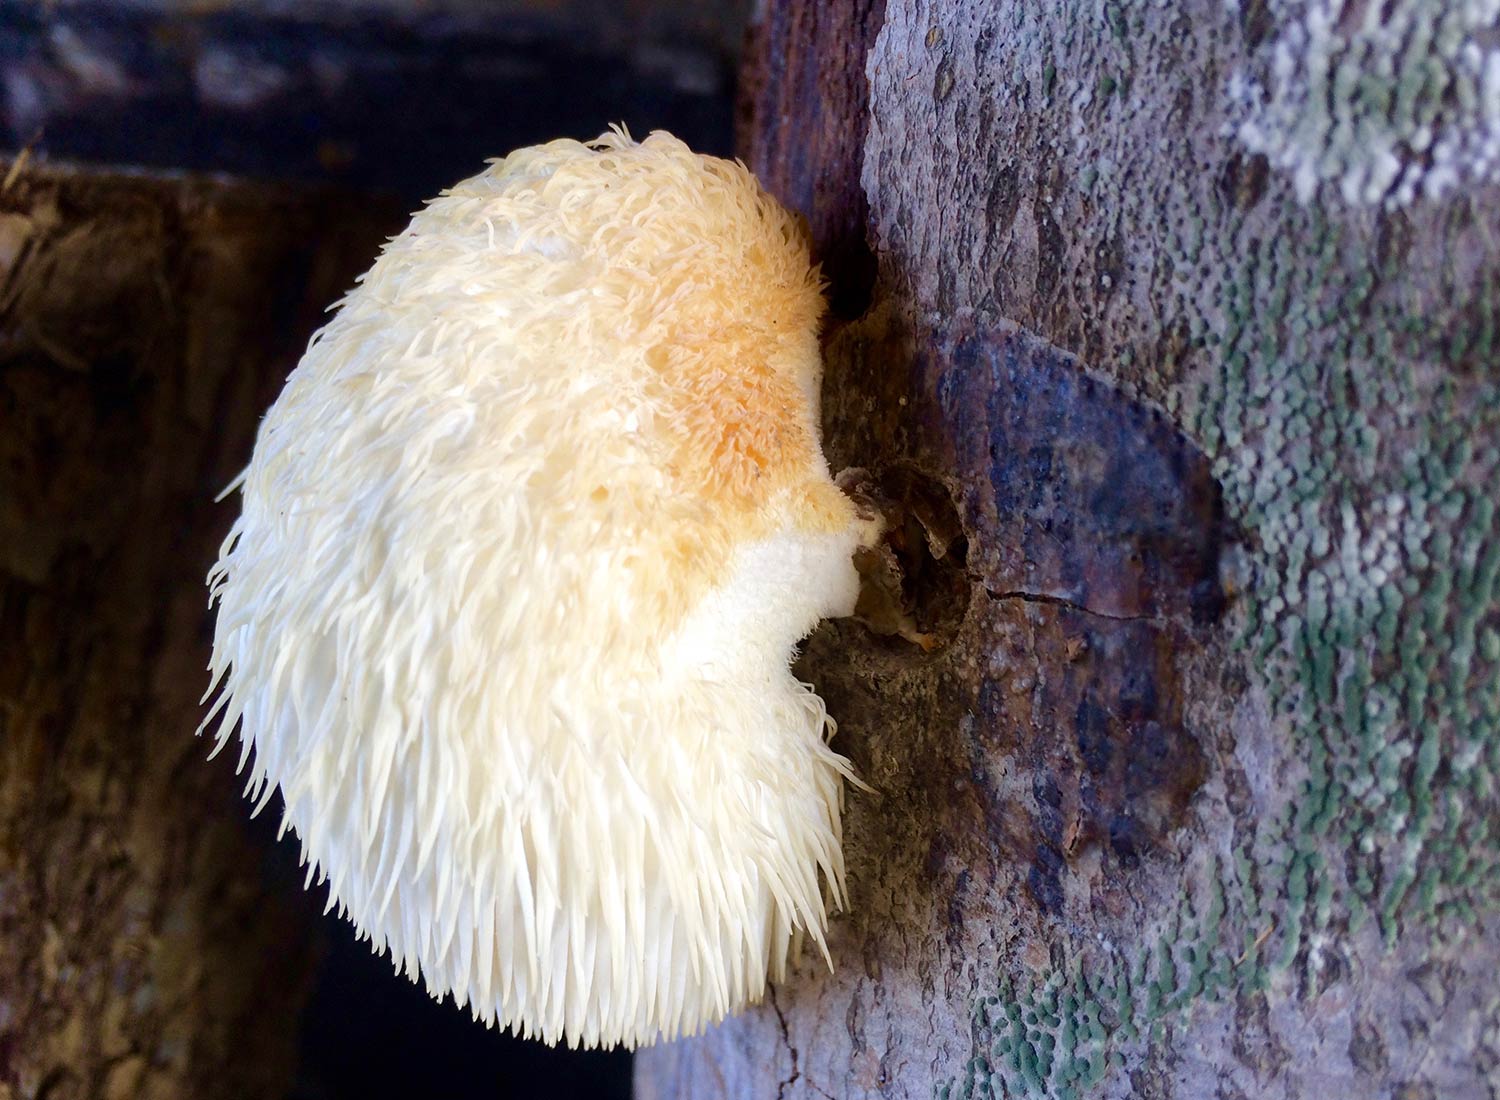 SHO Farm: vegan wild farming in a cold climate | lion's mane mushroom cultivated on beech logs selectively coppiced from our field-forest edge 